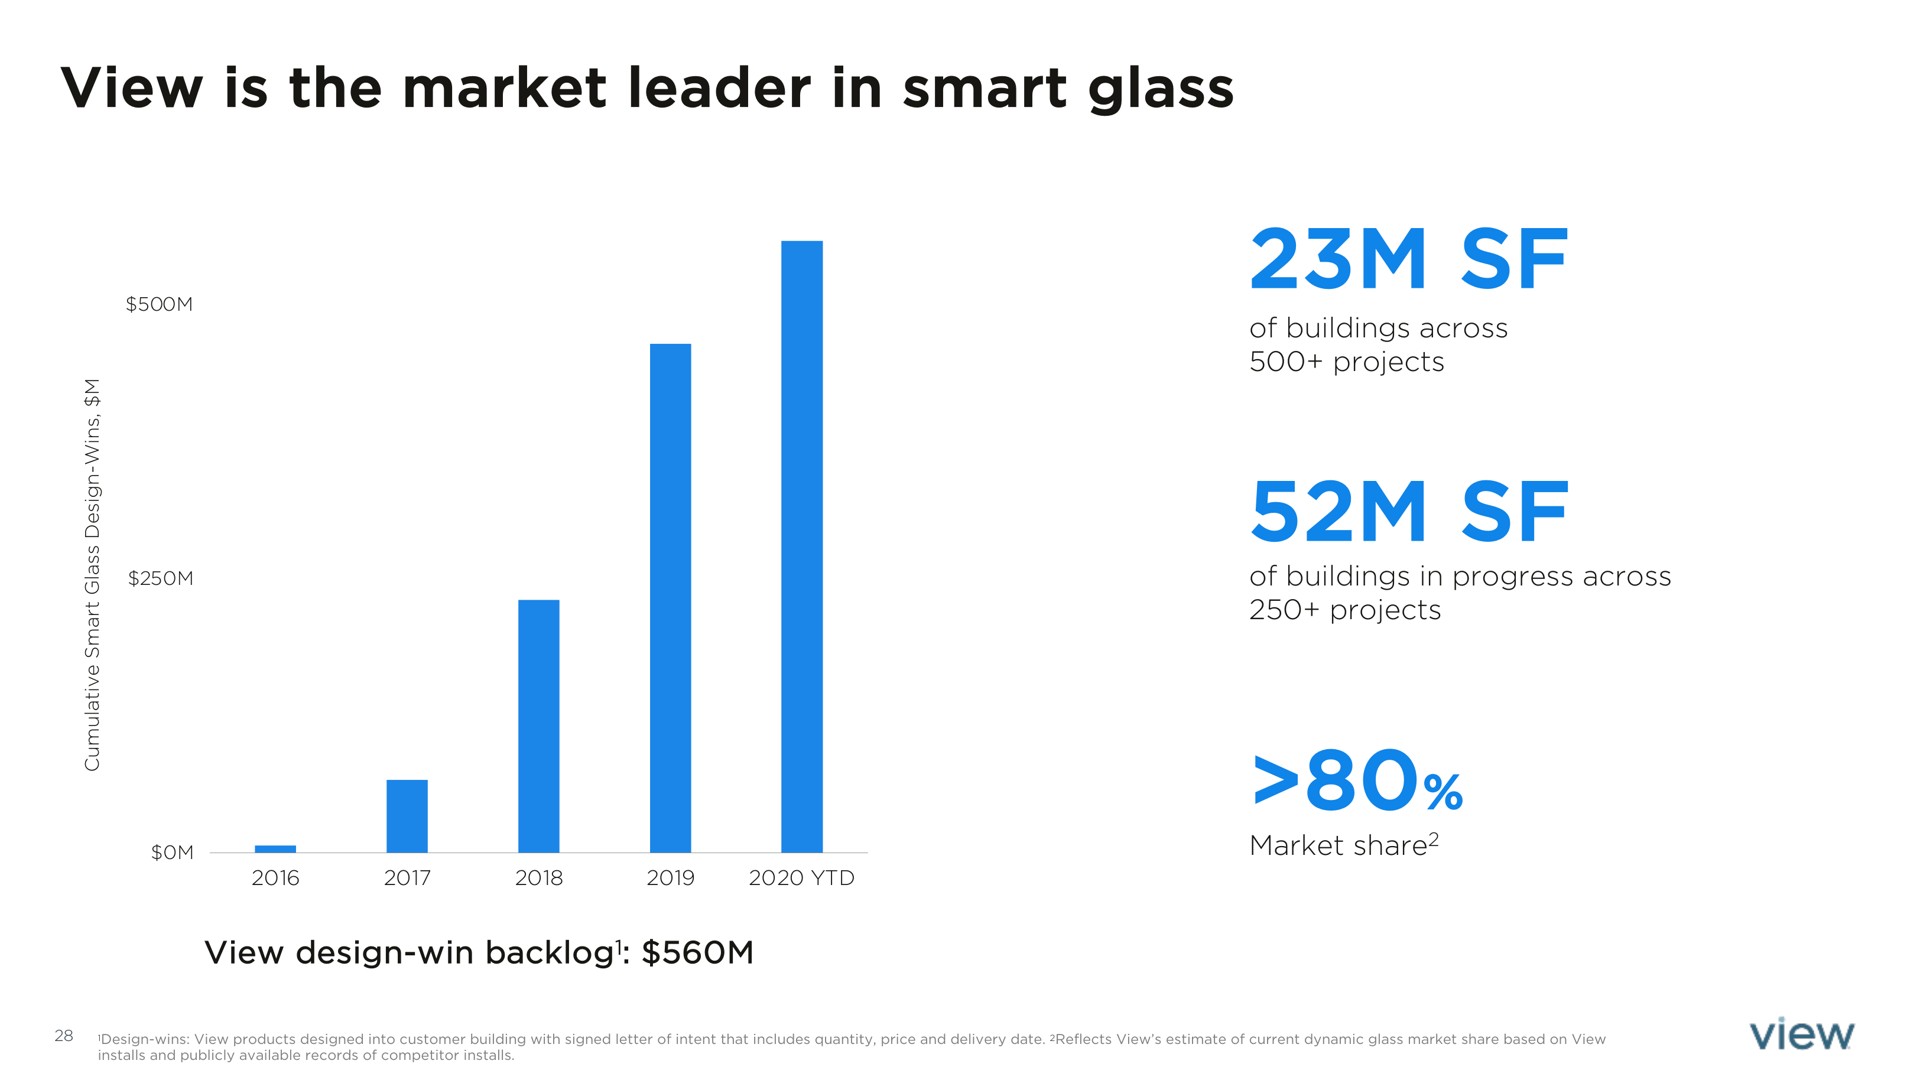 view is the market leader in smart glass | View